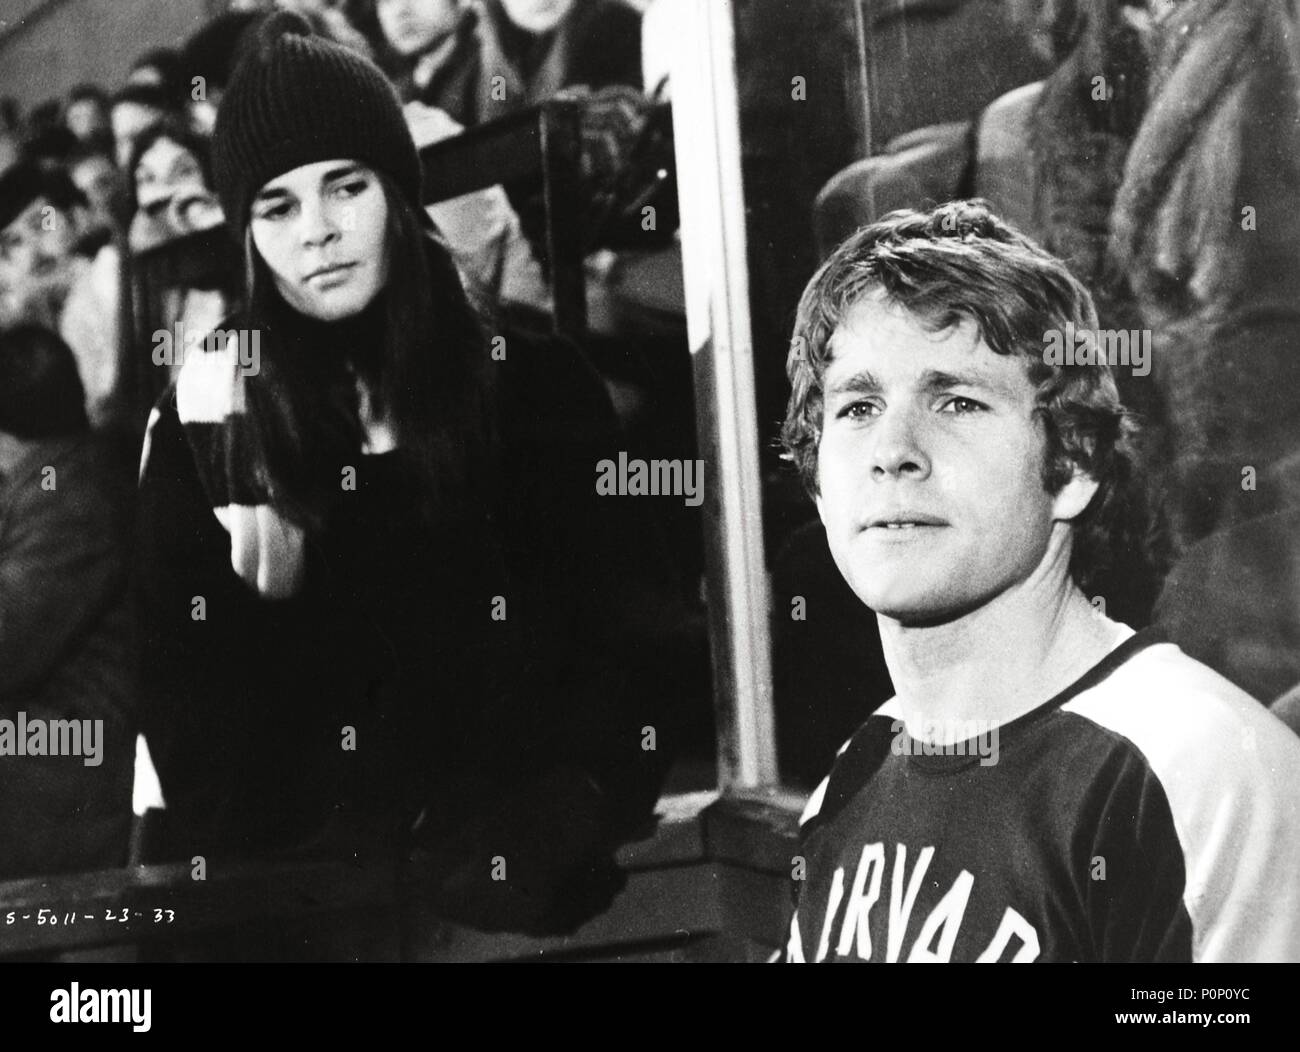 Original Film Title: LOVE STORY.  English Title: LOVE STORY.  Film Director: ARTHUR HILLER.  Year: 1970.  Stars: ALI MACGRAW; RYAN O'NEAL. Credit: PARAMOUNT PICTURES / Album Stock Photo